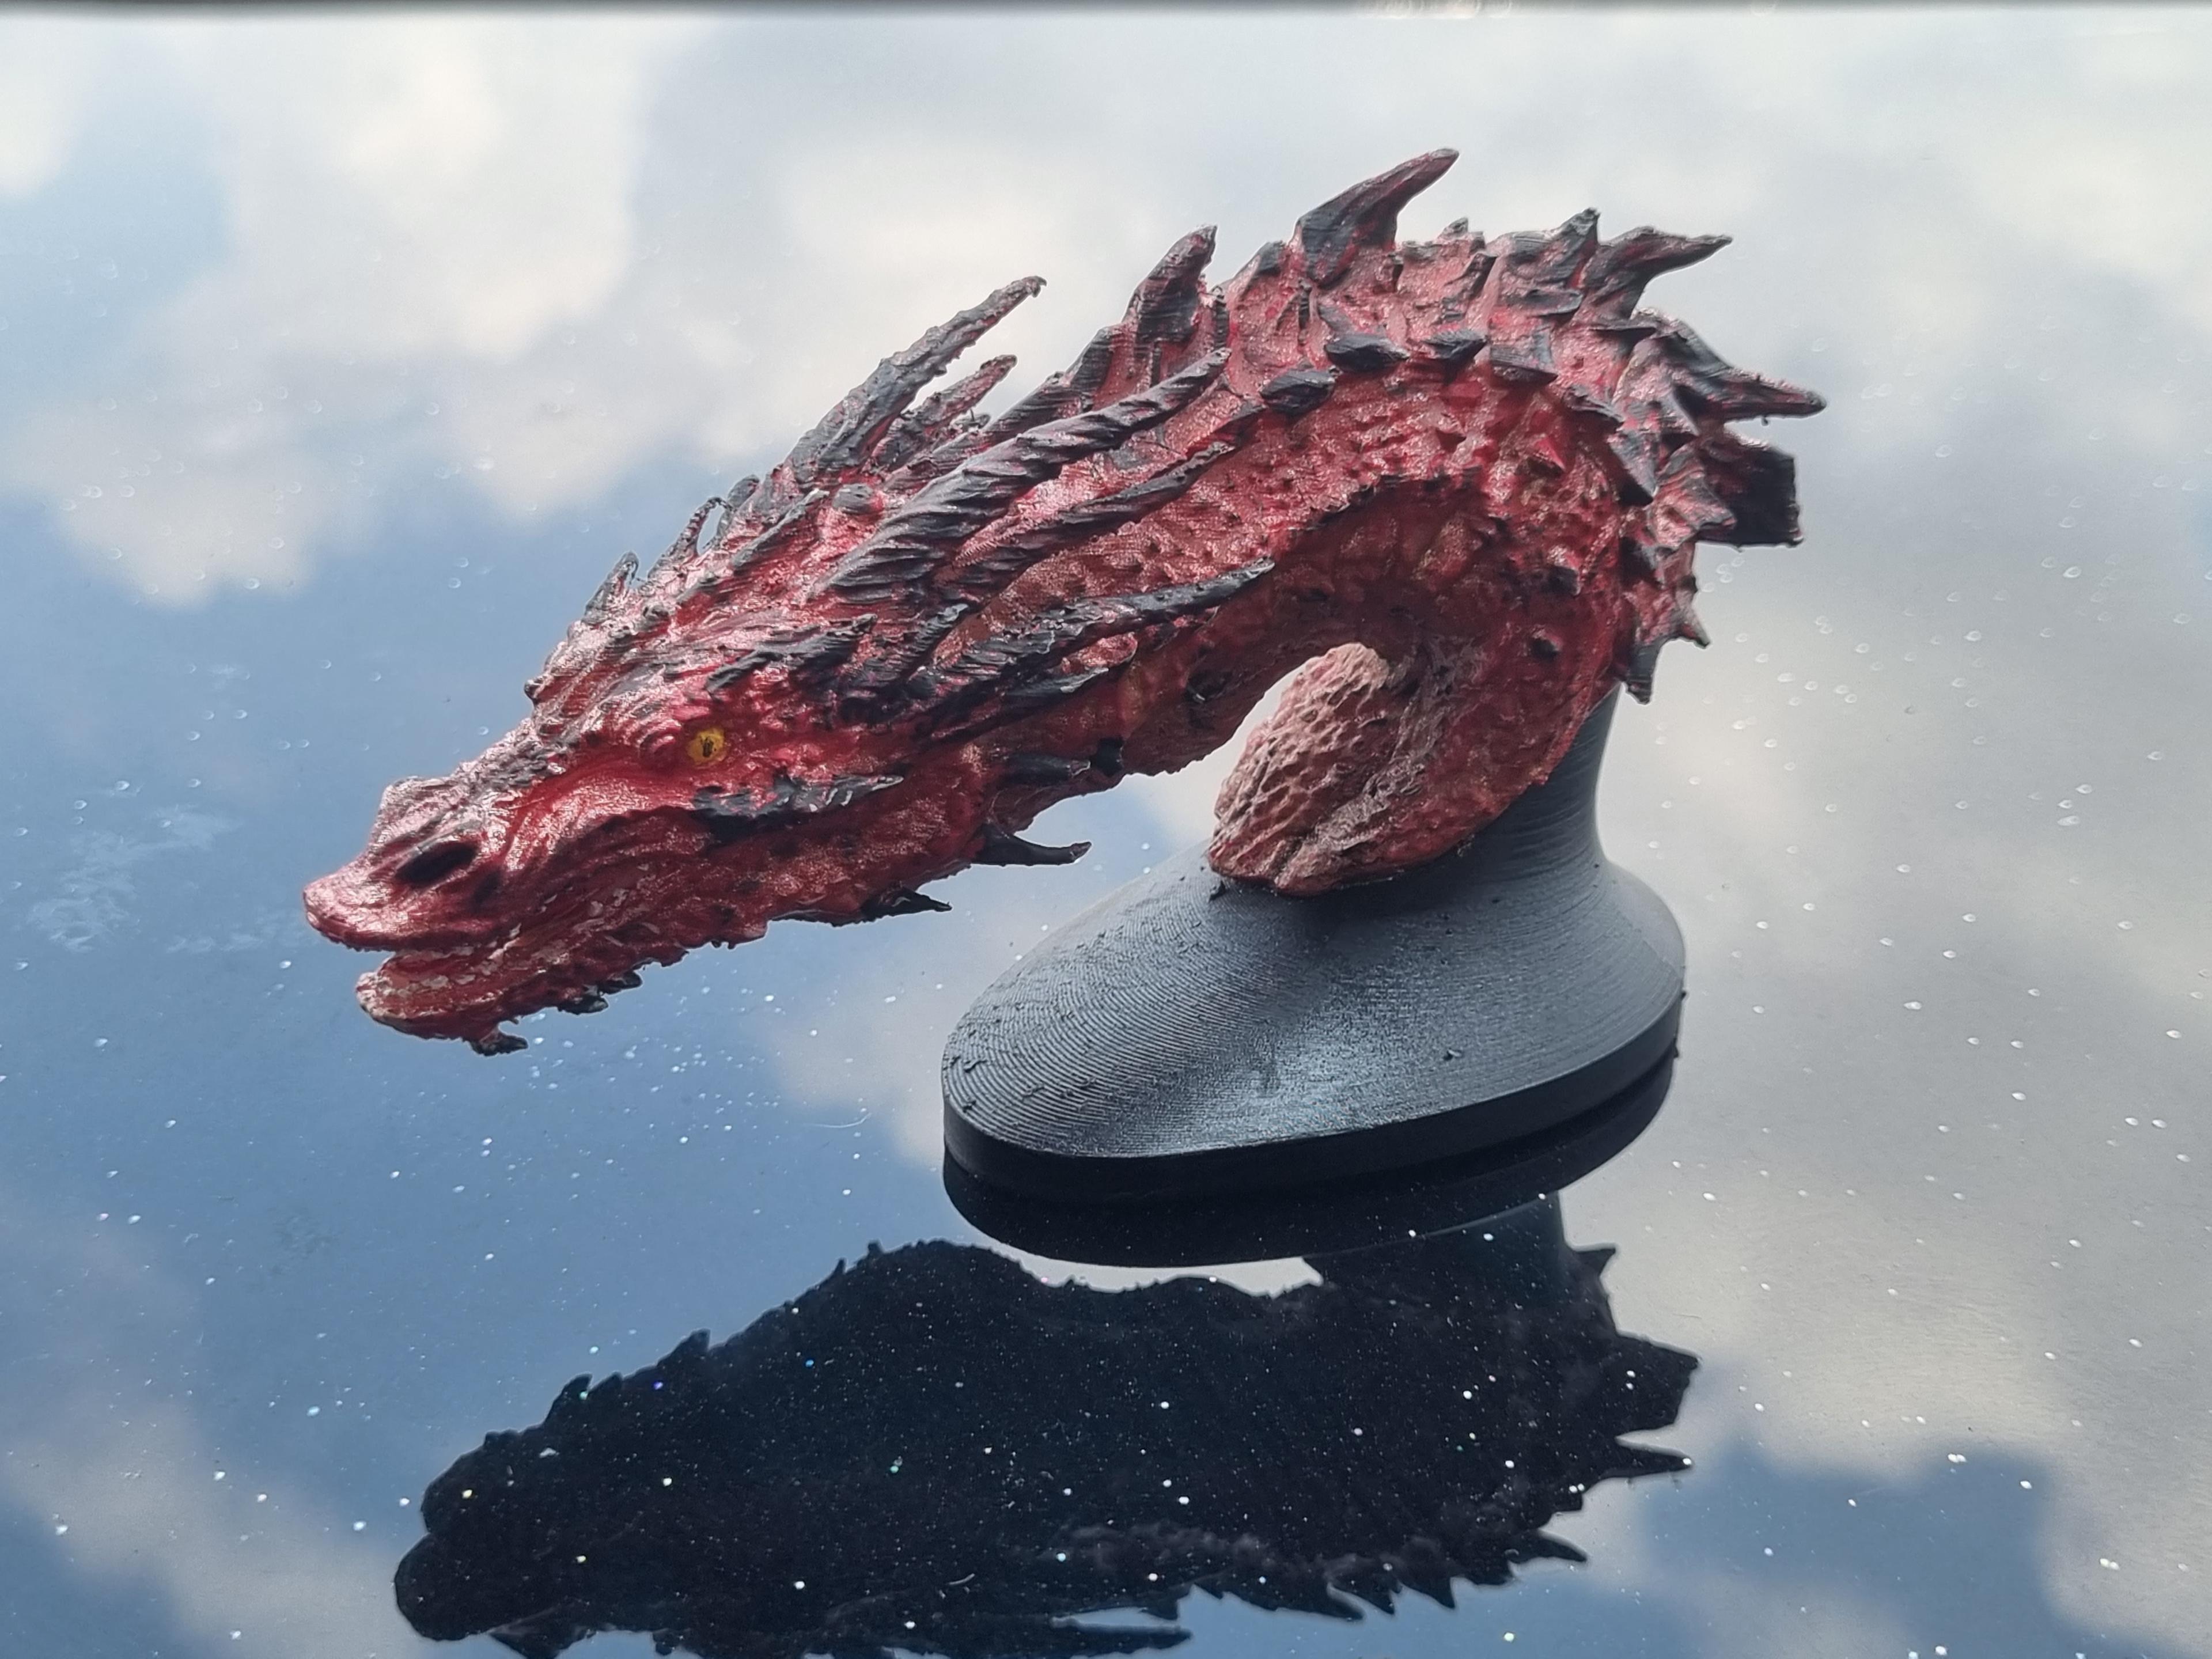 Smaug  - Printed at around 11cm length on Ender 3 Max Neo with 0.12mm layer height - 3d model